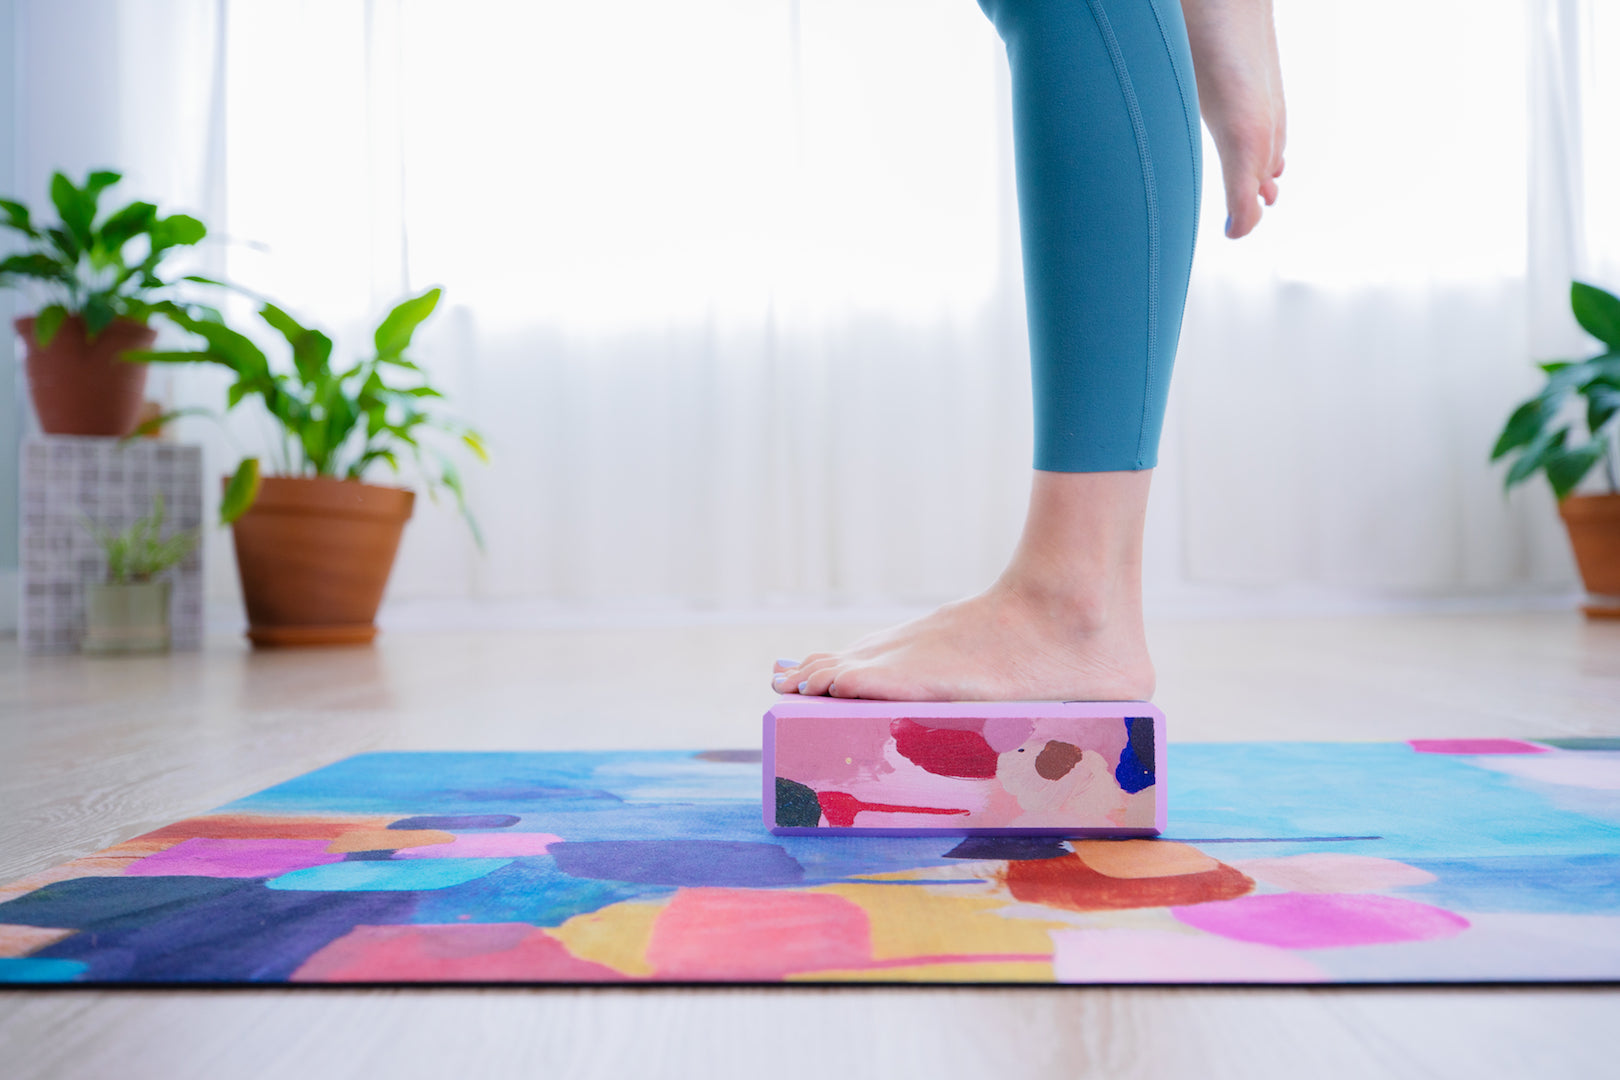 New kid on the (yoga) block? Our top three reasons to add a yoga block to your practice